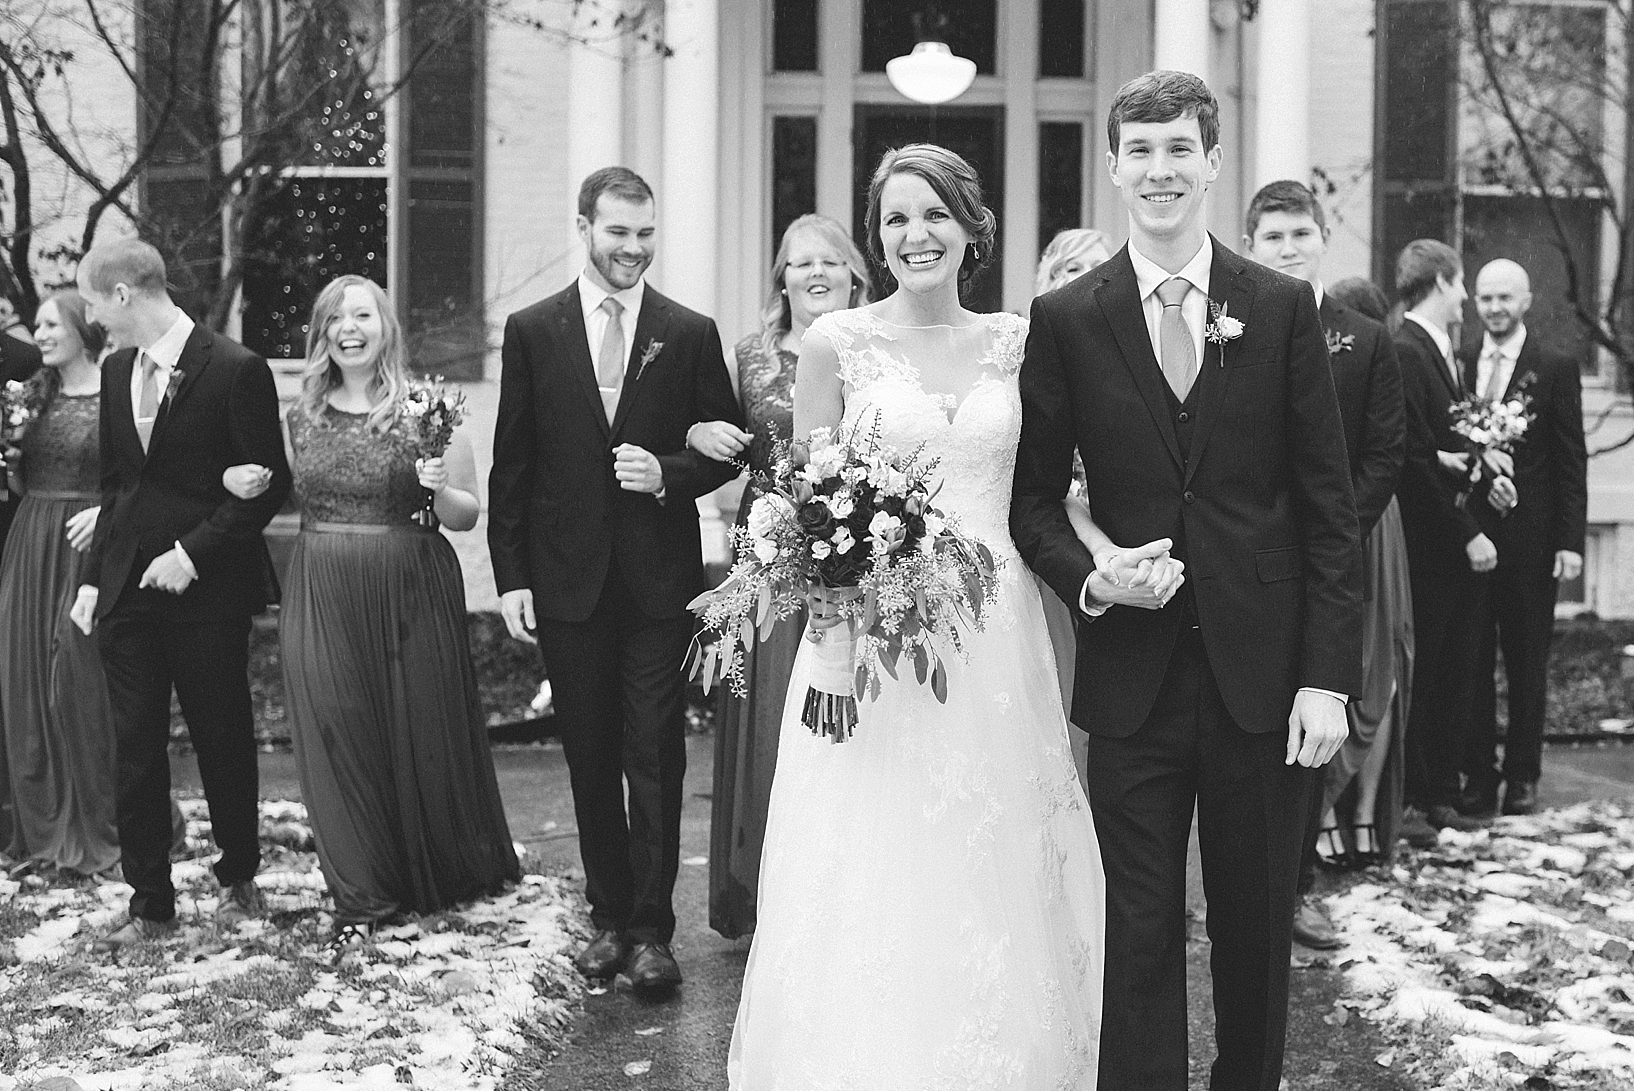 bride and groom walking hand in hand up snowy sidewalk with bridal party walking behind